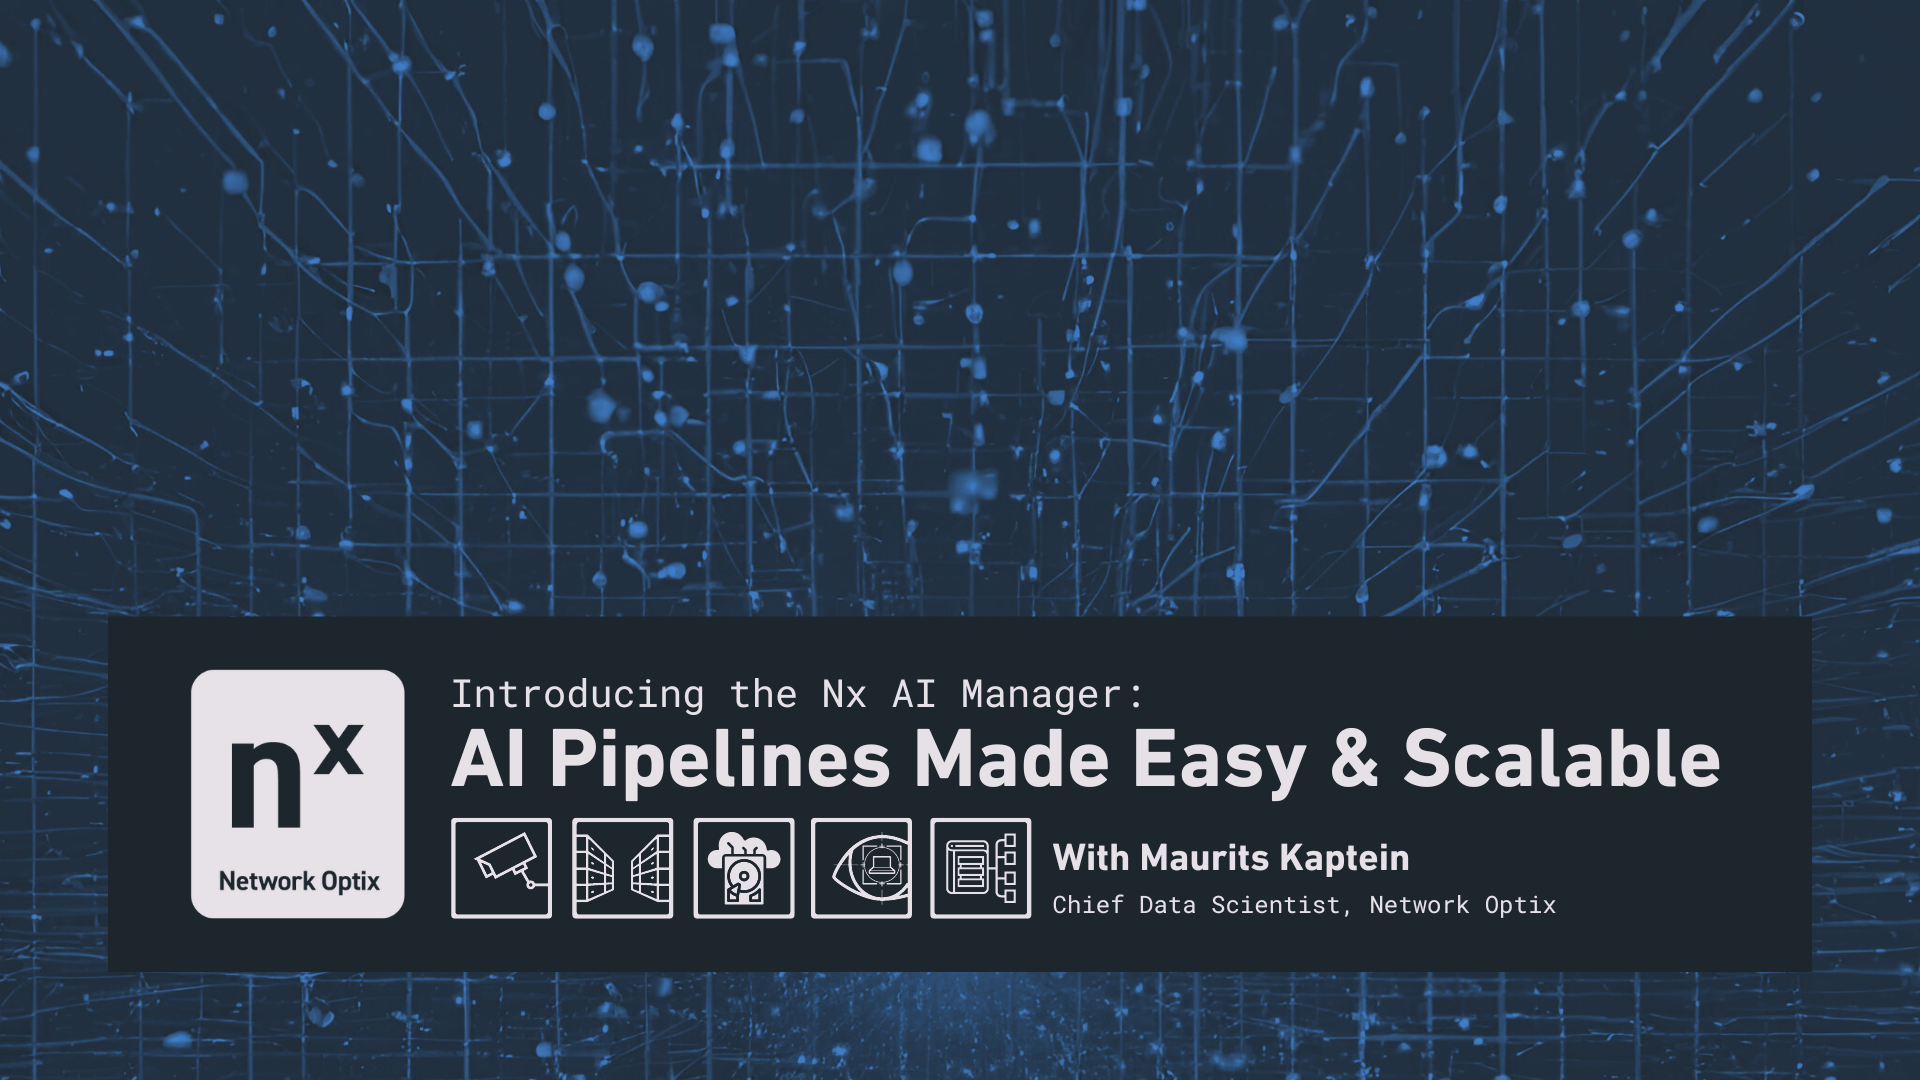 Nx AI Manager AI Pipelines Featured Image